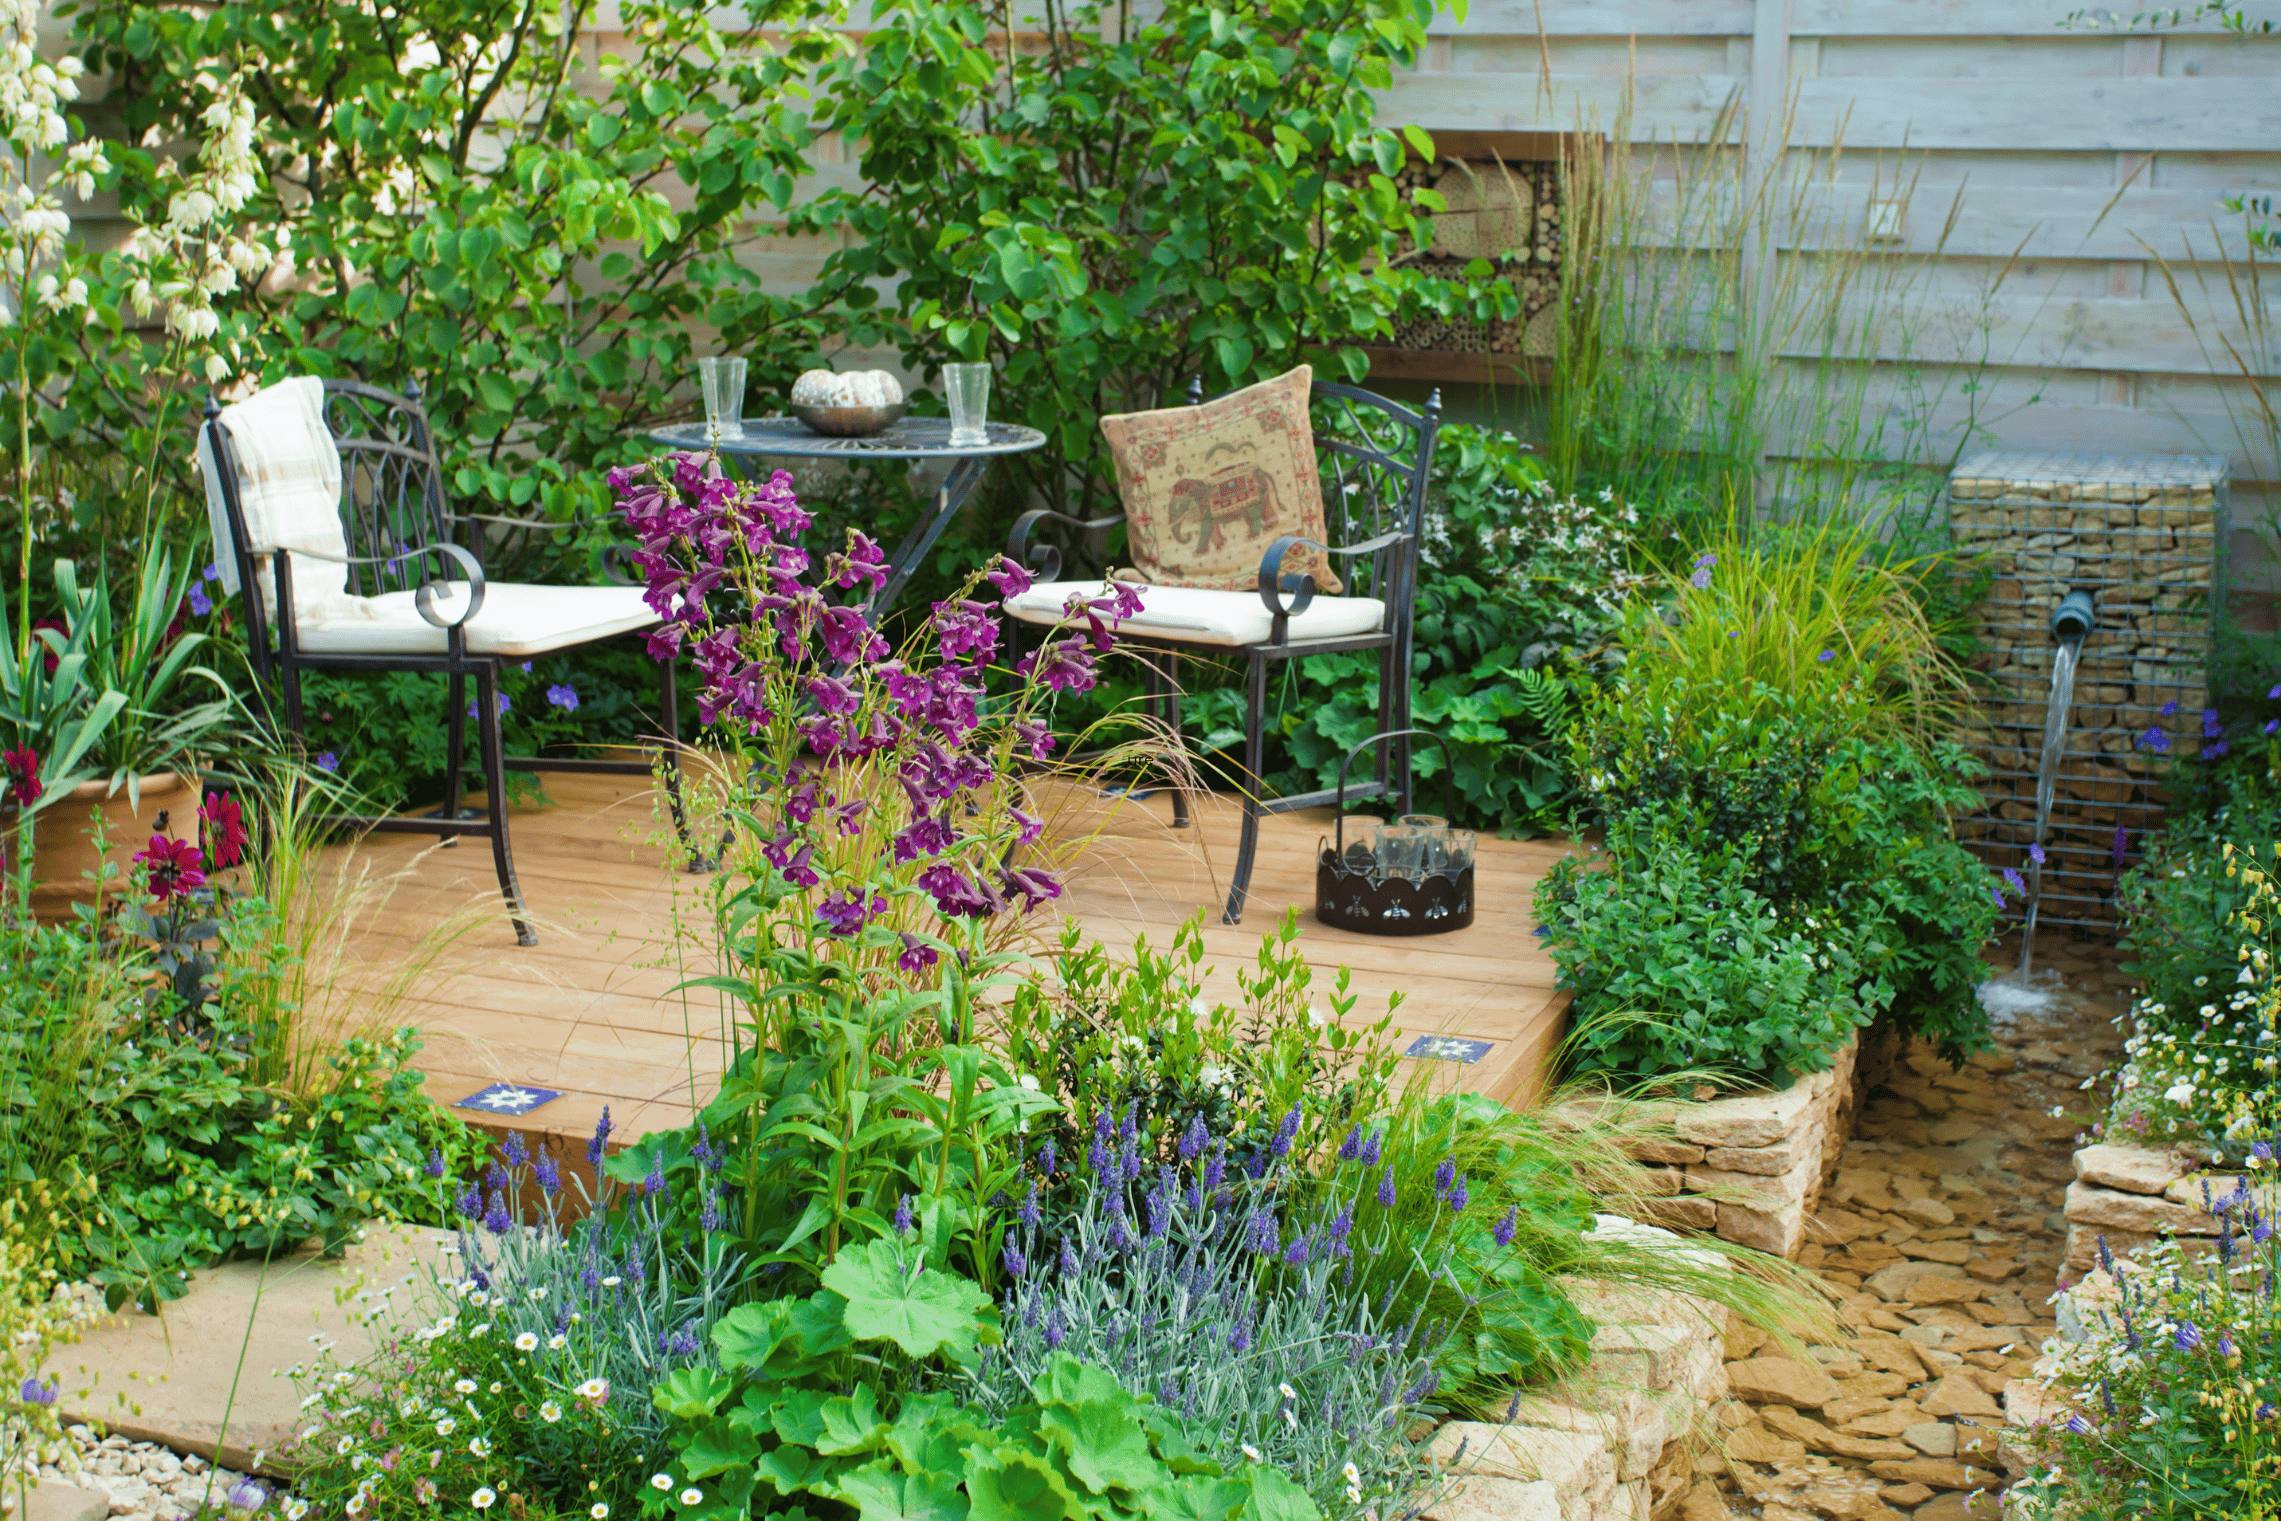 An image of a patio surrounded by plants and a garden.